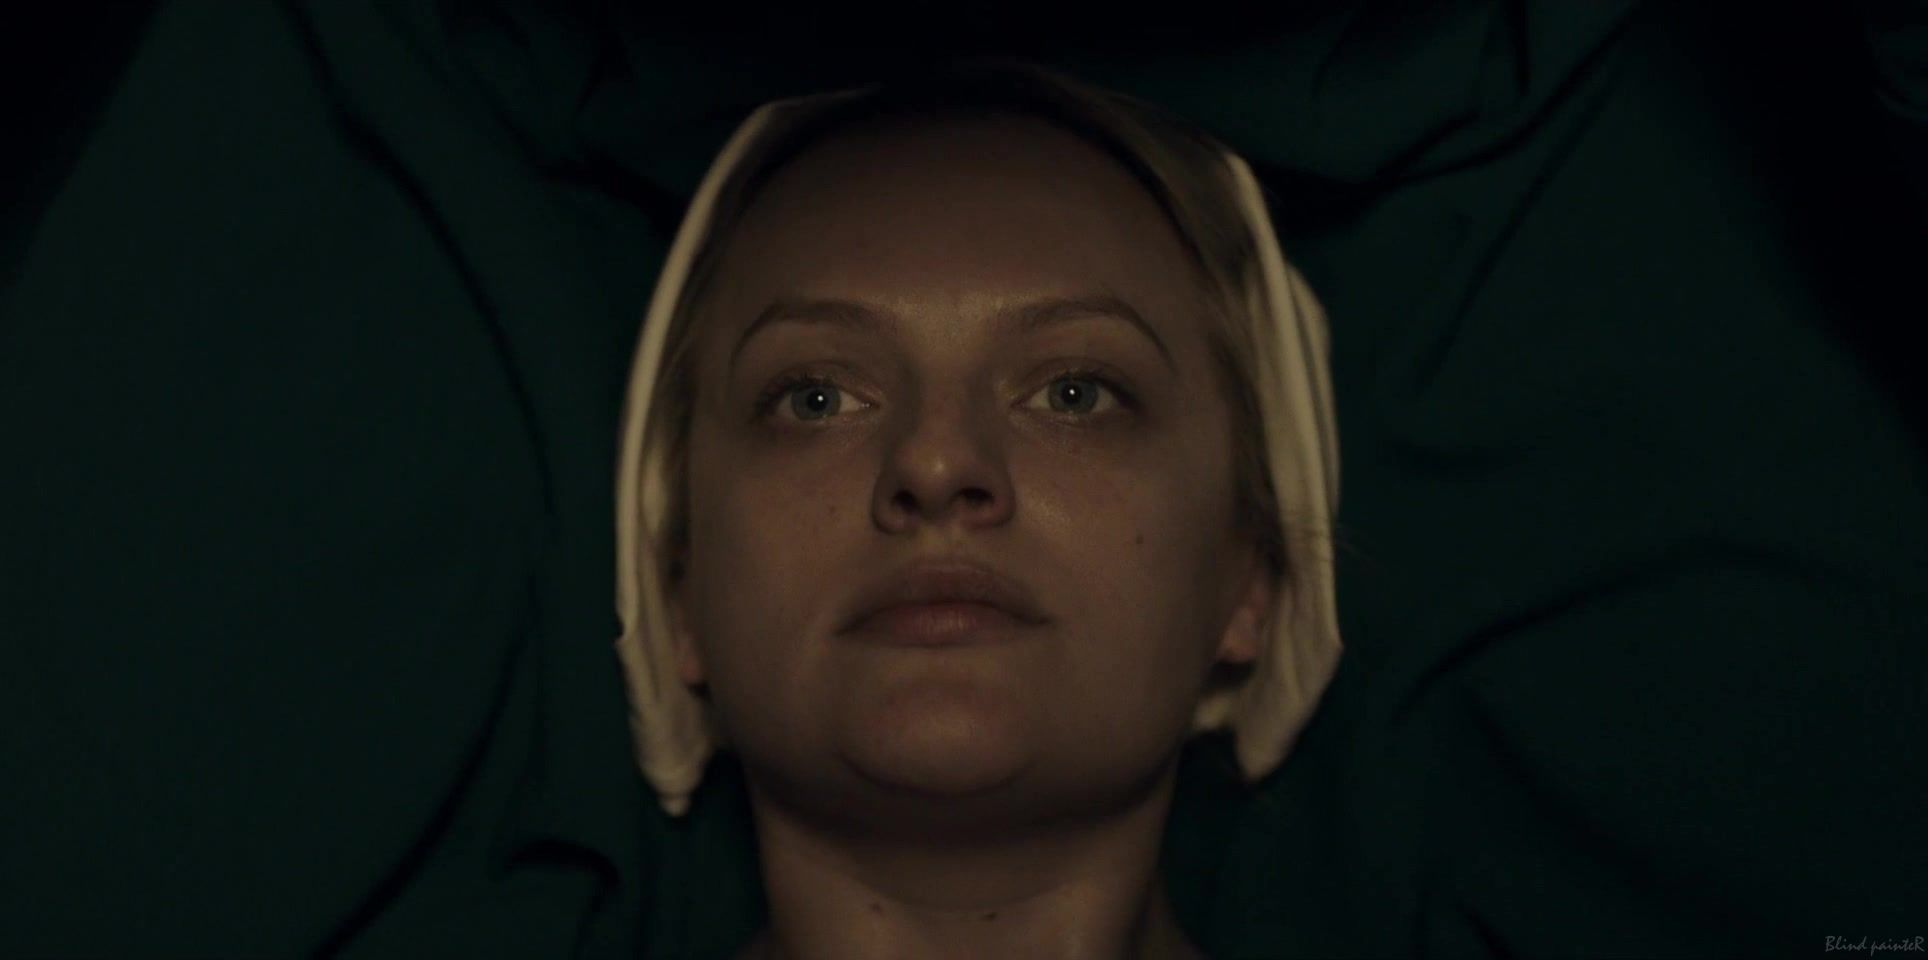 Gay College Elisabeth Moss, Alexis Bledel nude - The Handmaid’s Tale S01E01-04 (2017) Passionate - 1